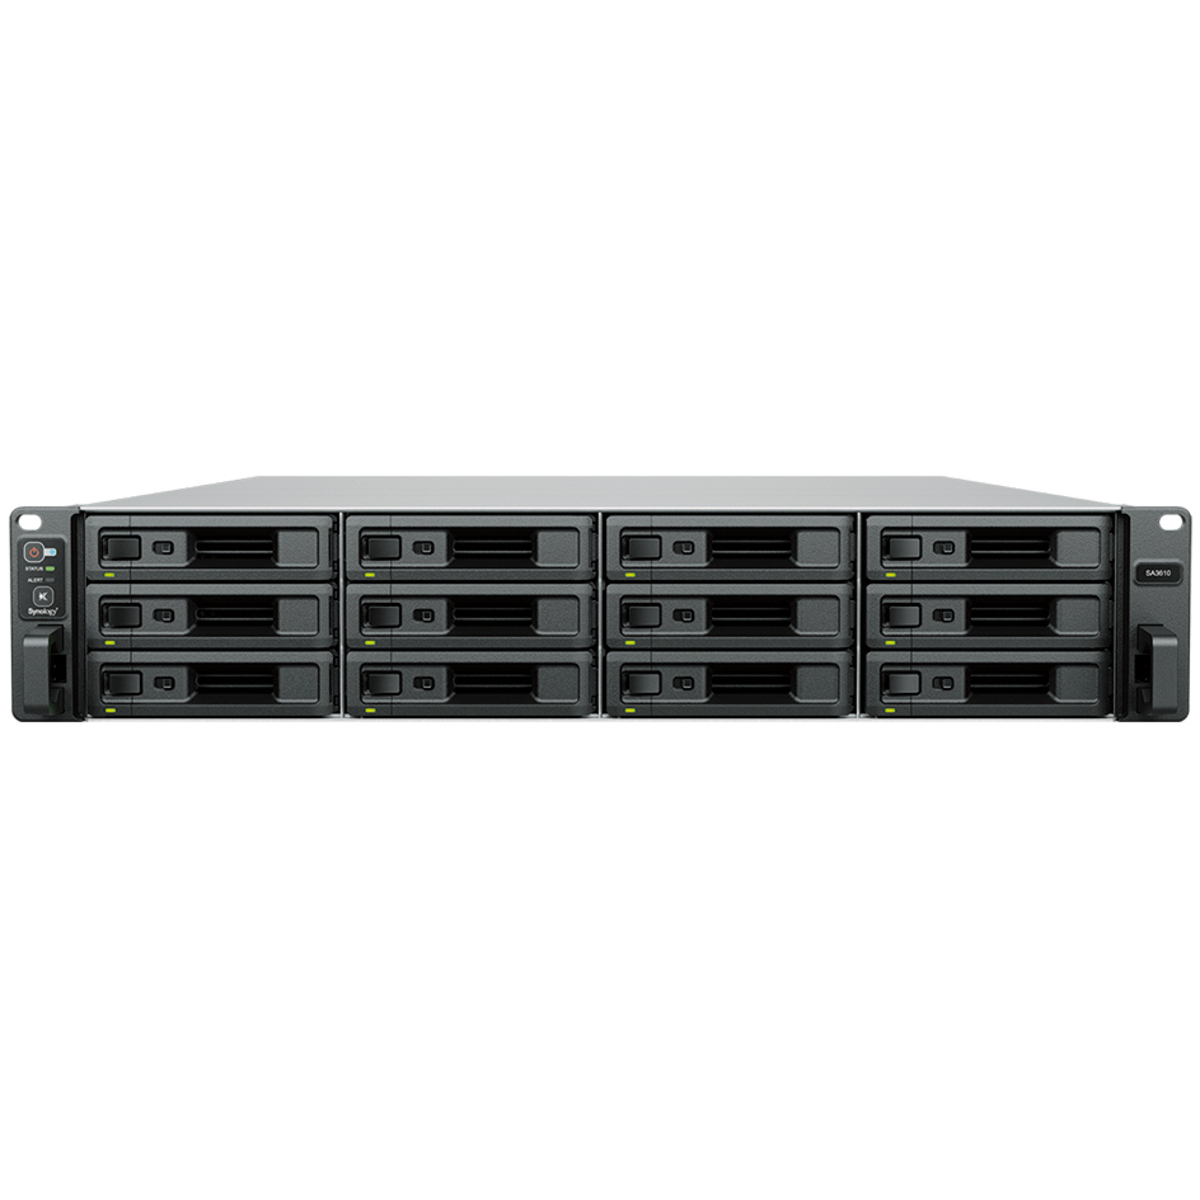 Synology RackStation SA3610 72tb 12-Bay RackMount Large Business / Enterprise NAS - Network Attached Storage Device 9x8tb Synology HAT5310 Series HAT5310-8T 3.5 7200rpm SATA 6Gb/s HDD ENTERPRISE Class Drives Installed - Burn-In Tested RackStation SA3610